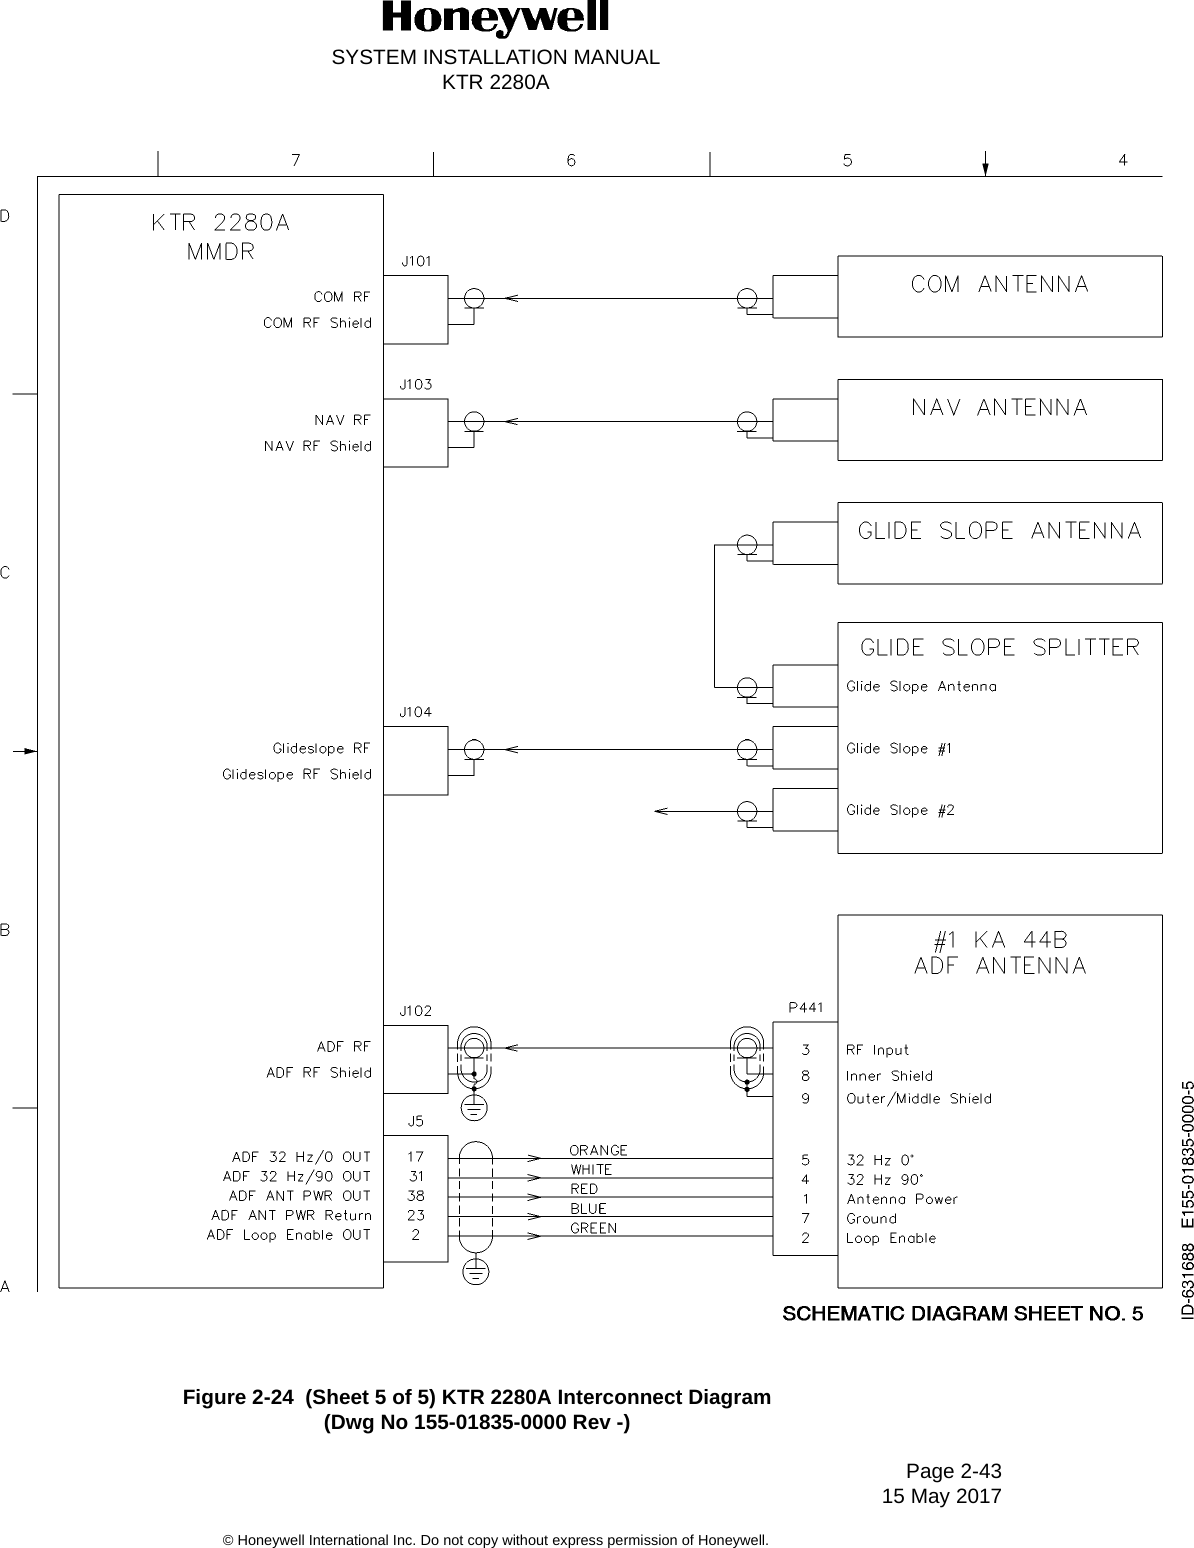 SYSTEM INSTALLATION MANUALKTR 2280APage 2-43 15 May 2017© Honeywell International Inc. Do not copy without express permission of Honeywell.Figure 2-24  (Sheet 5 of 5) KTR 2280A Interconnect Diagram(Dwg No 155-01835-0000 Rev -)